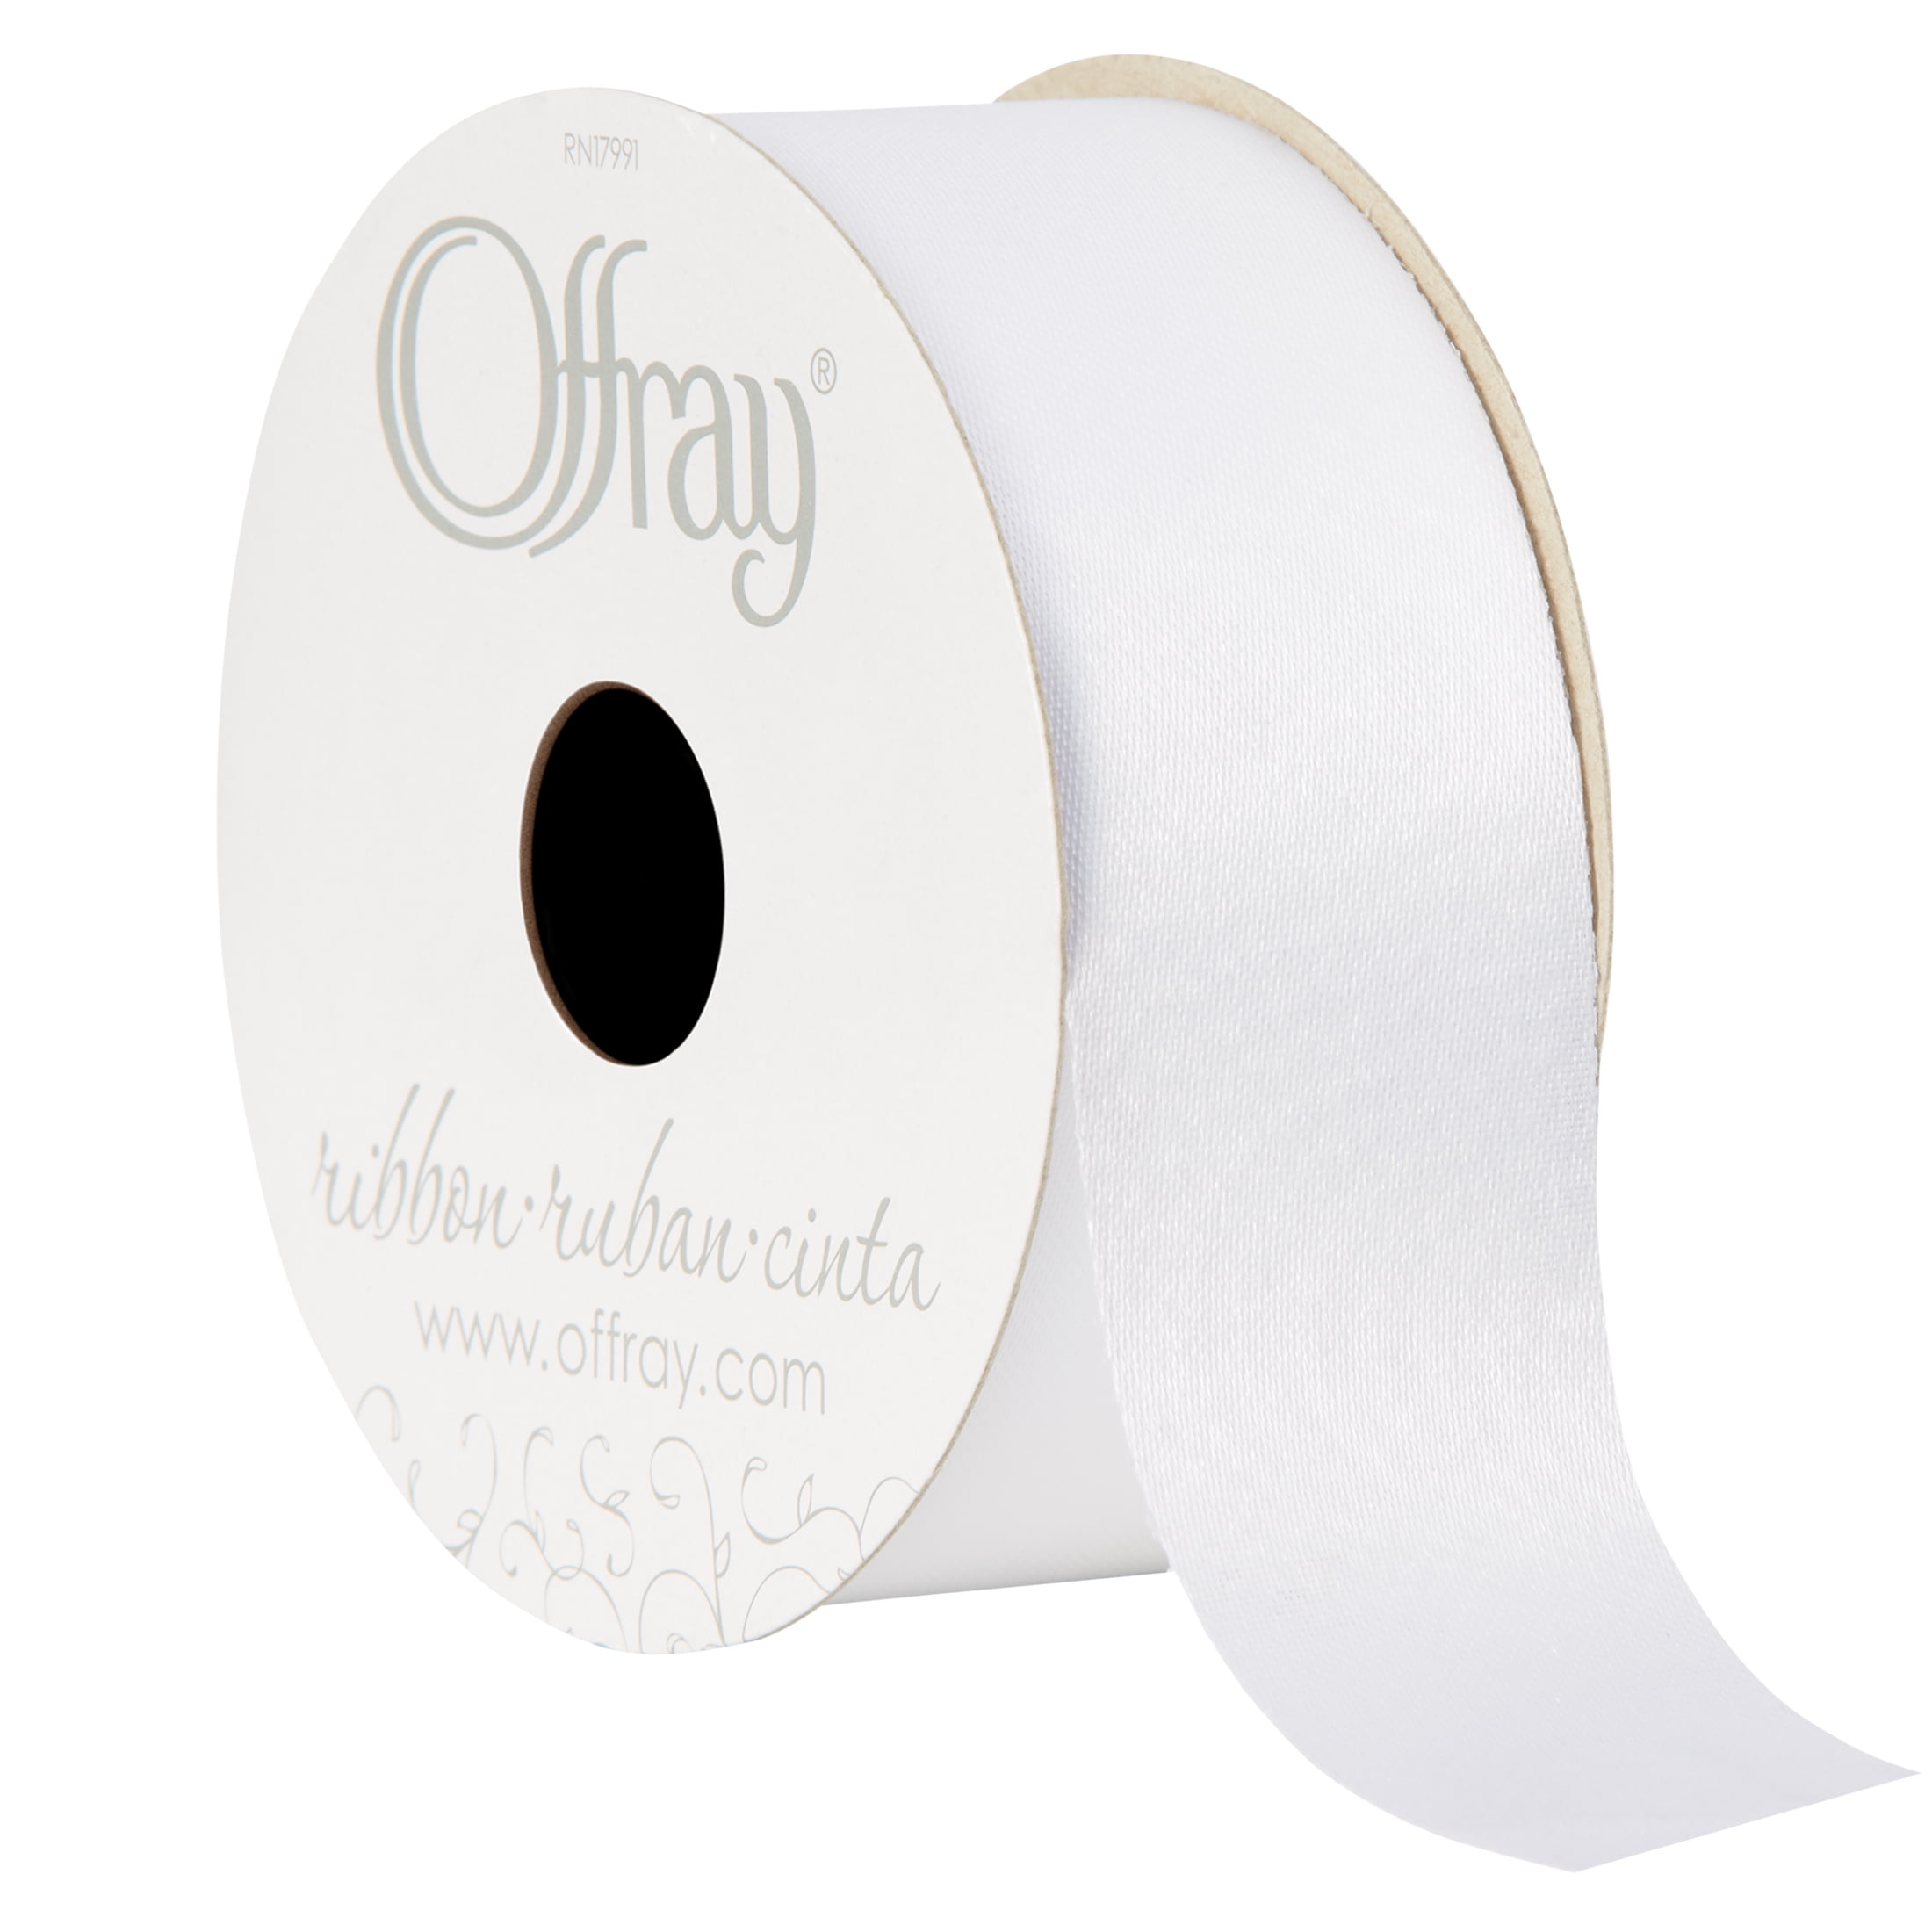 Offray Ribbon, White 1 1/2 inch Acetate Polyester Outdoor Ribbon for Floral Displays and Decorations, 21 feet, 1 Each